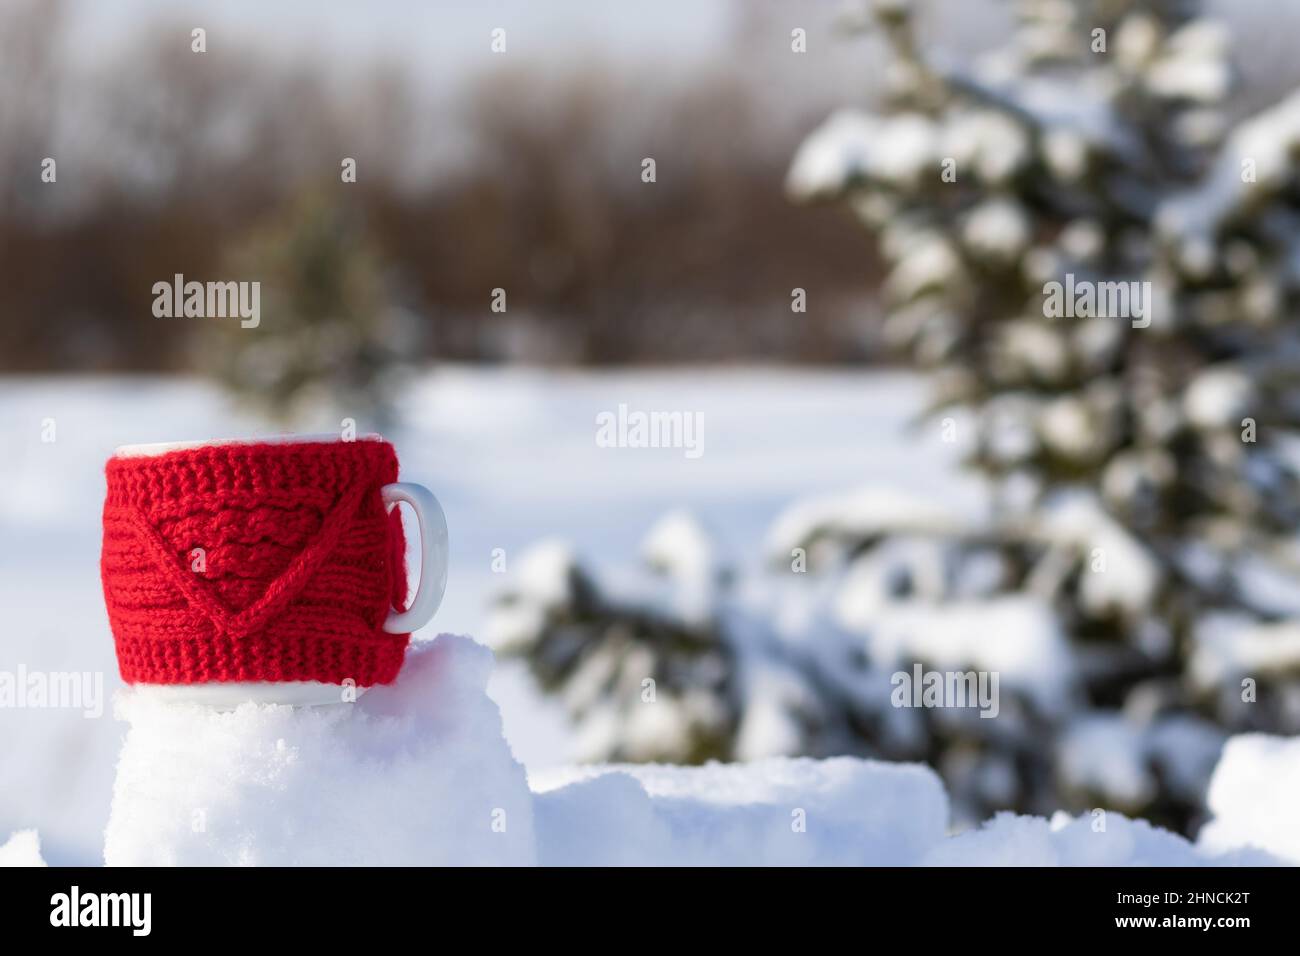 https://c8.alamy.com/comp/2HNCK2T/a-red-mug-with-a-hot-drink-on-a-snowdrift-on-a-frosty-sunny-winter-day-in-the-forest-against-the-backdrop-of-snow-covered-fir-trees-landscape-select-2HNCK2T.jpg